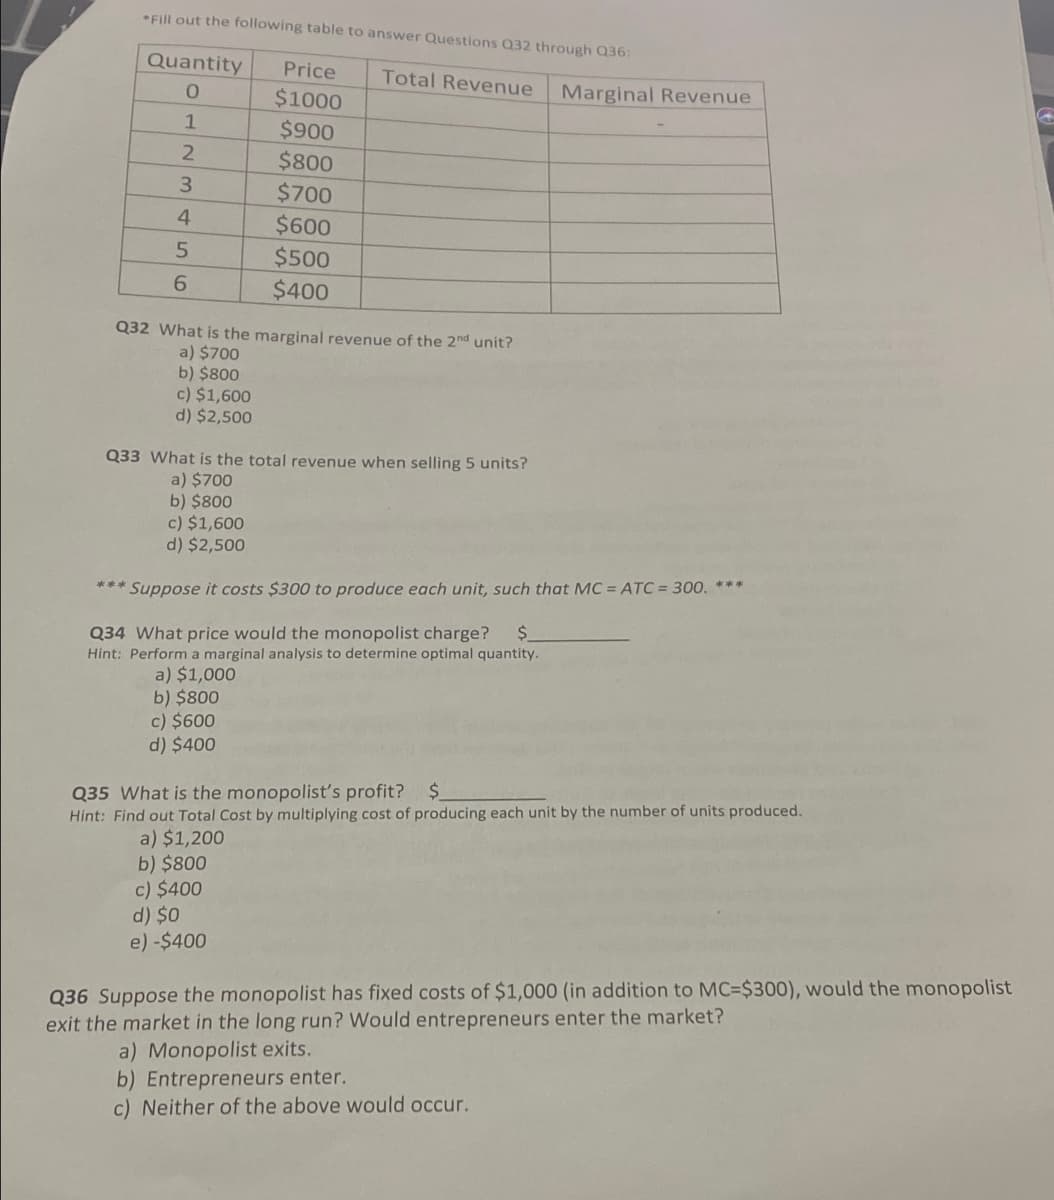 Fill out the following table to answer Questions Q32 through Q36:
Quantity
Price
Total Revenue
$1000
Marginal Revenue
$900
$800
3
$700
4.
$600
$500
6.
$400
Q32 What is the marginal revenue of the 2nd unit?
a) $700
b) $800
c) $1,600
d) $2,500
Q33 What is the total revenue when selling 5 units?
a) $700
b) $800
c) $1,600
d) $2,500
*** Suppose it costs $300 to produce each unit, such that MC = ATC = 300, ***
Q34 What price would the monopolist charge?
$.
Hint: Perform a marginal analysis to determine optimal quantity.
a) $1,000
b) $800
c) $600
d) $400
Q35 What is the monopolist's profit?
Hint: Find out Total Cost by multiplying cost of producing each unit by the number of units produced.
$.
a) $1,200
b) $800
c) $400
d) $0
e)-$400
Q36 Suppose the monopolist has fixed costs of $1,000 (in addition to MC=$300), would the monopolist
exit the market in the long run? Would entrepreneurs enter the market?
a) Monopolist exits.
b) Entrepreneurs enter.
c) Neither of the above would occur.
